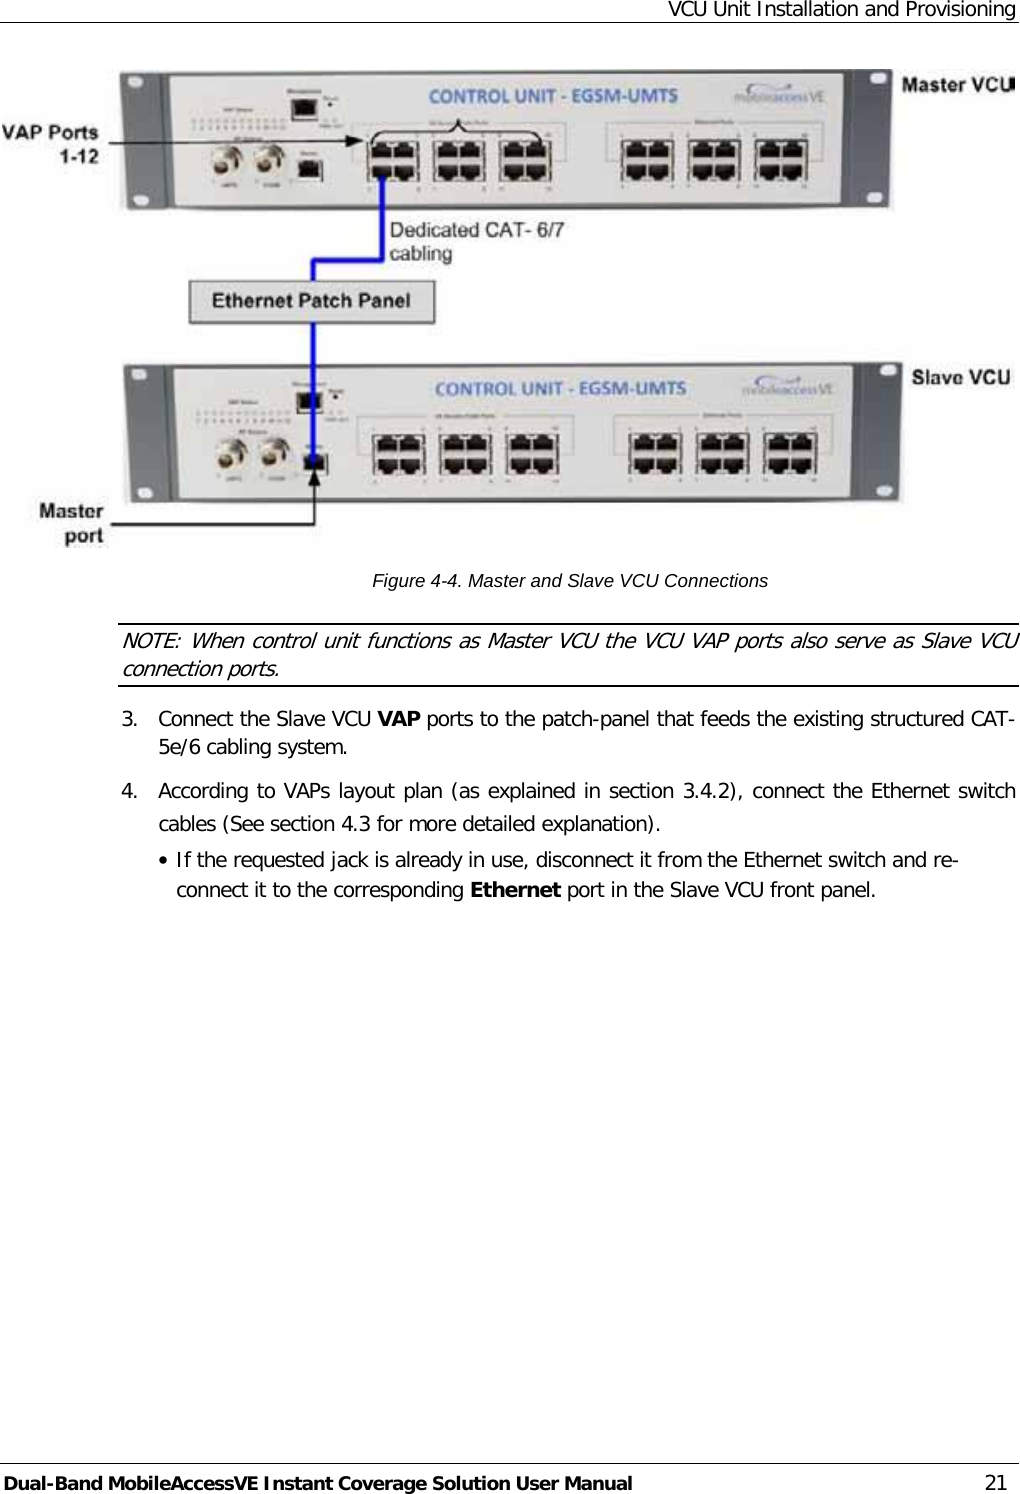 VCU Unit Installation and Provisioning Dual-Band MobileAccessVE Instant Coverage Solution User Manual 21  Figure  4-4. Master and Slave VCU Connections NOTE: When control unit functions as Master VCU the VCU VAP ports also serve as Slave VCU connection ports. 3.  Connect the Slave VCU VAP ports to the patch-panel that feeds the existing structured CAT-5e/6 cabling system. 4.  According to VAPs layout plan (as explained in section  3.4.2), connect the Ethernet switch cables (See section  4.3 for more detailed explanation). · If the requested jack is already in use, disconnect it from the Ethernet switch and re-connect it to the corresponding Ethernet port in the Slave VCU front panel. 